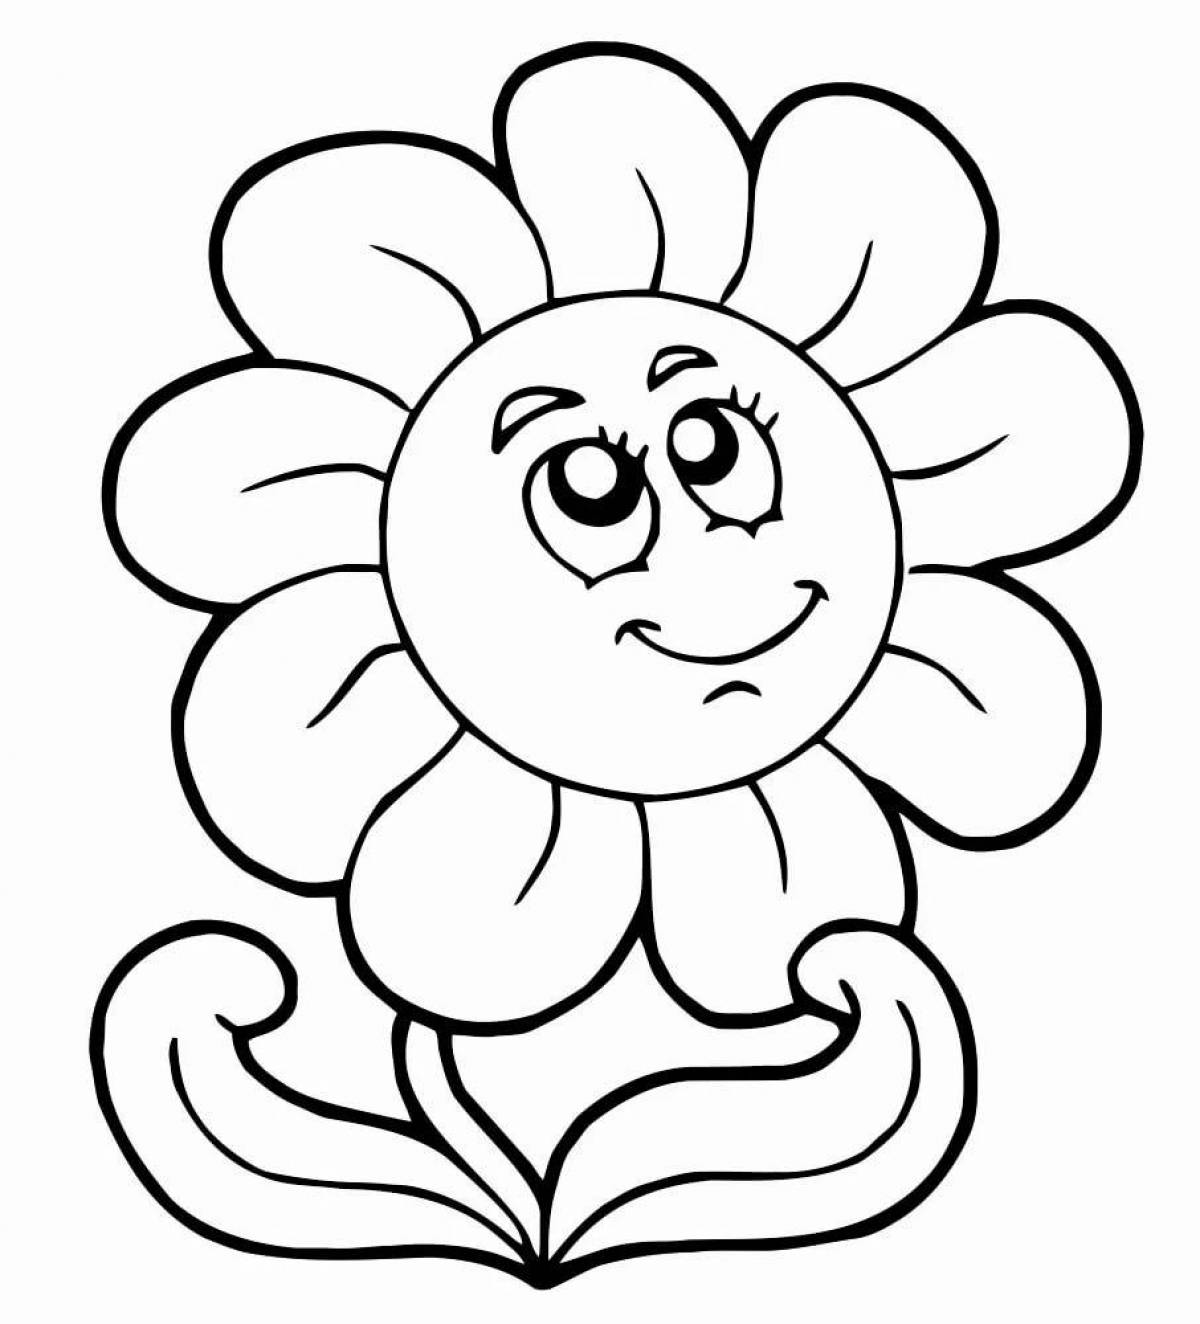 Amazing flower coloring book for kids 3-4 years old